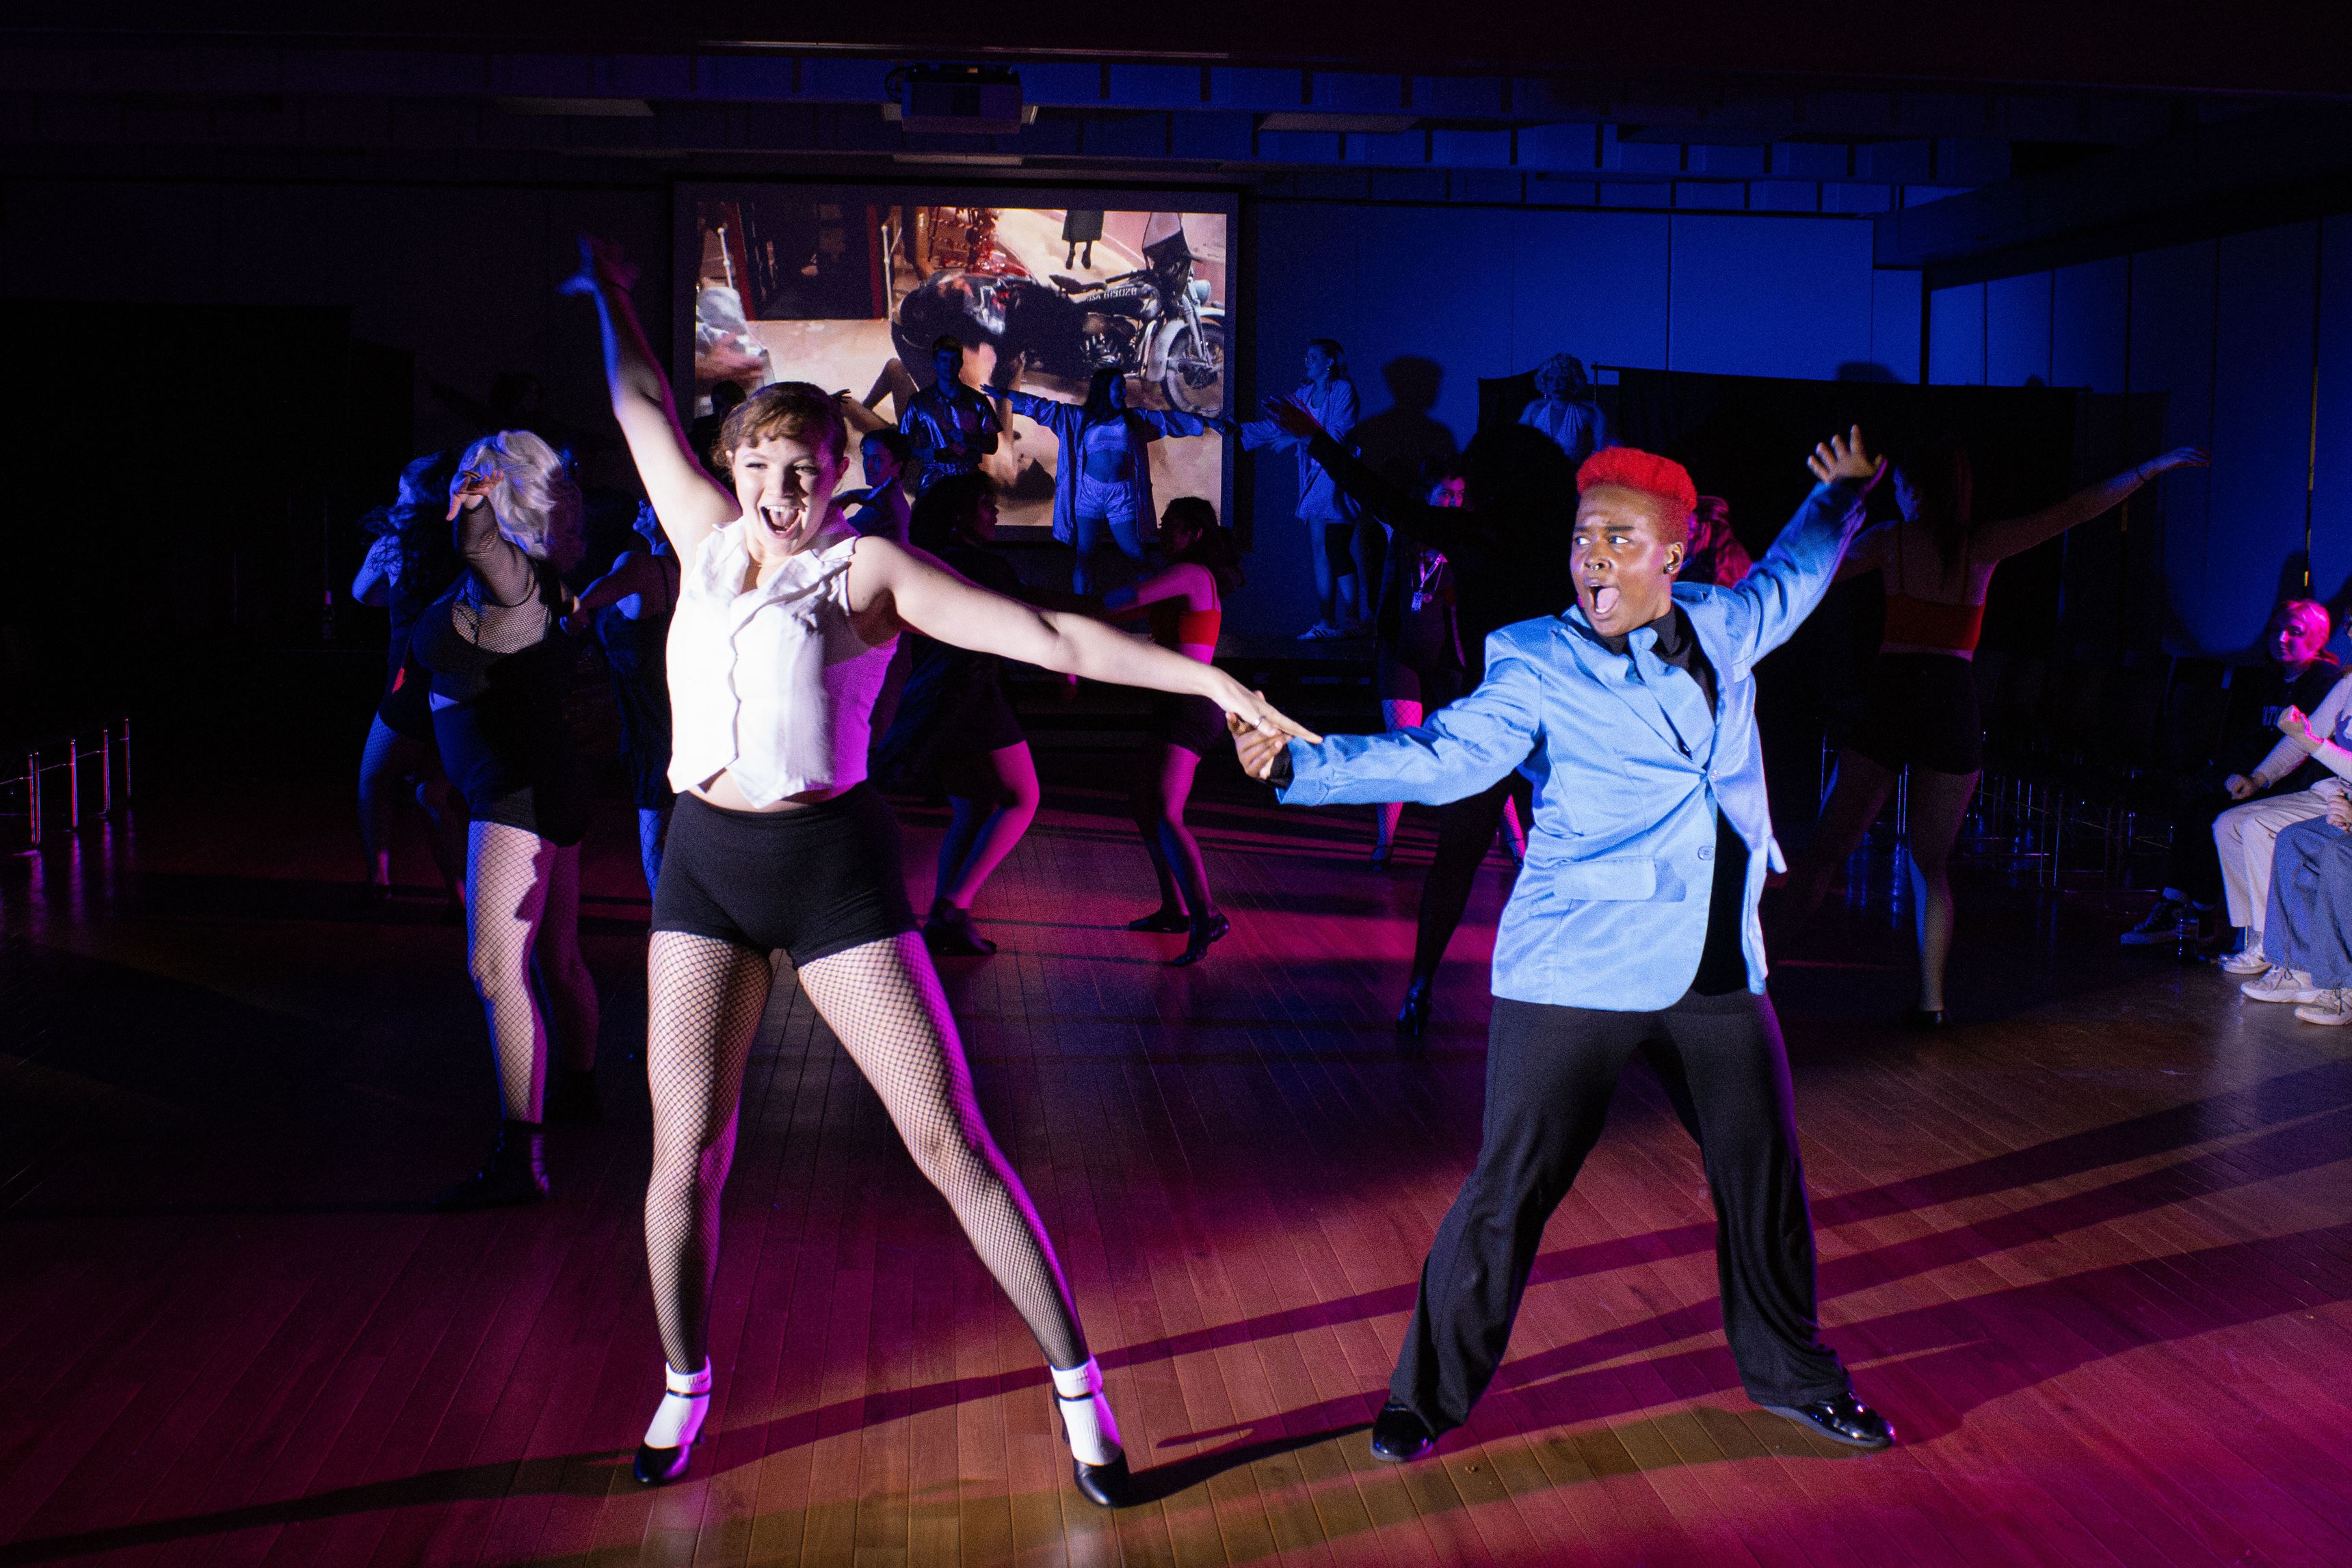 Eddie, played by Kaz Charles, and Columbia, played by Sofia Salerno, rocking out to "What Ever Happened to Saturday Night." Dani Mazariegos | The Montclarion